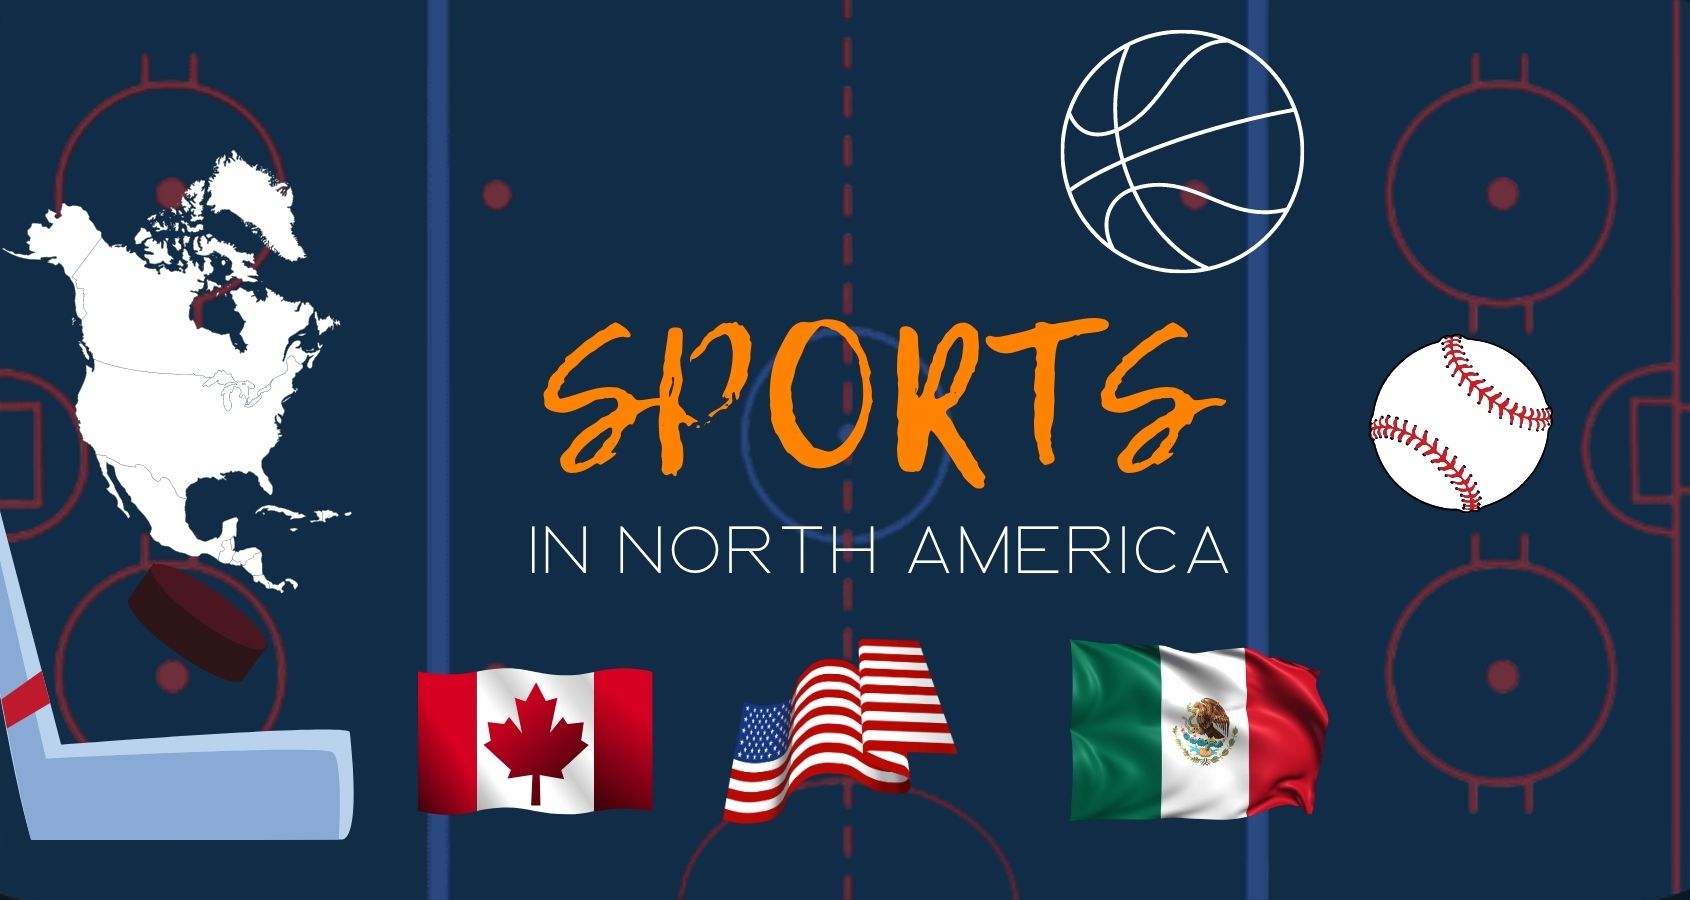 popular sports for betting in North America